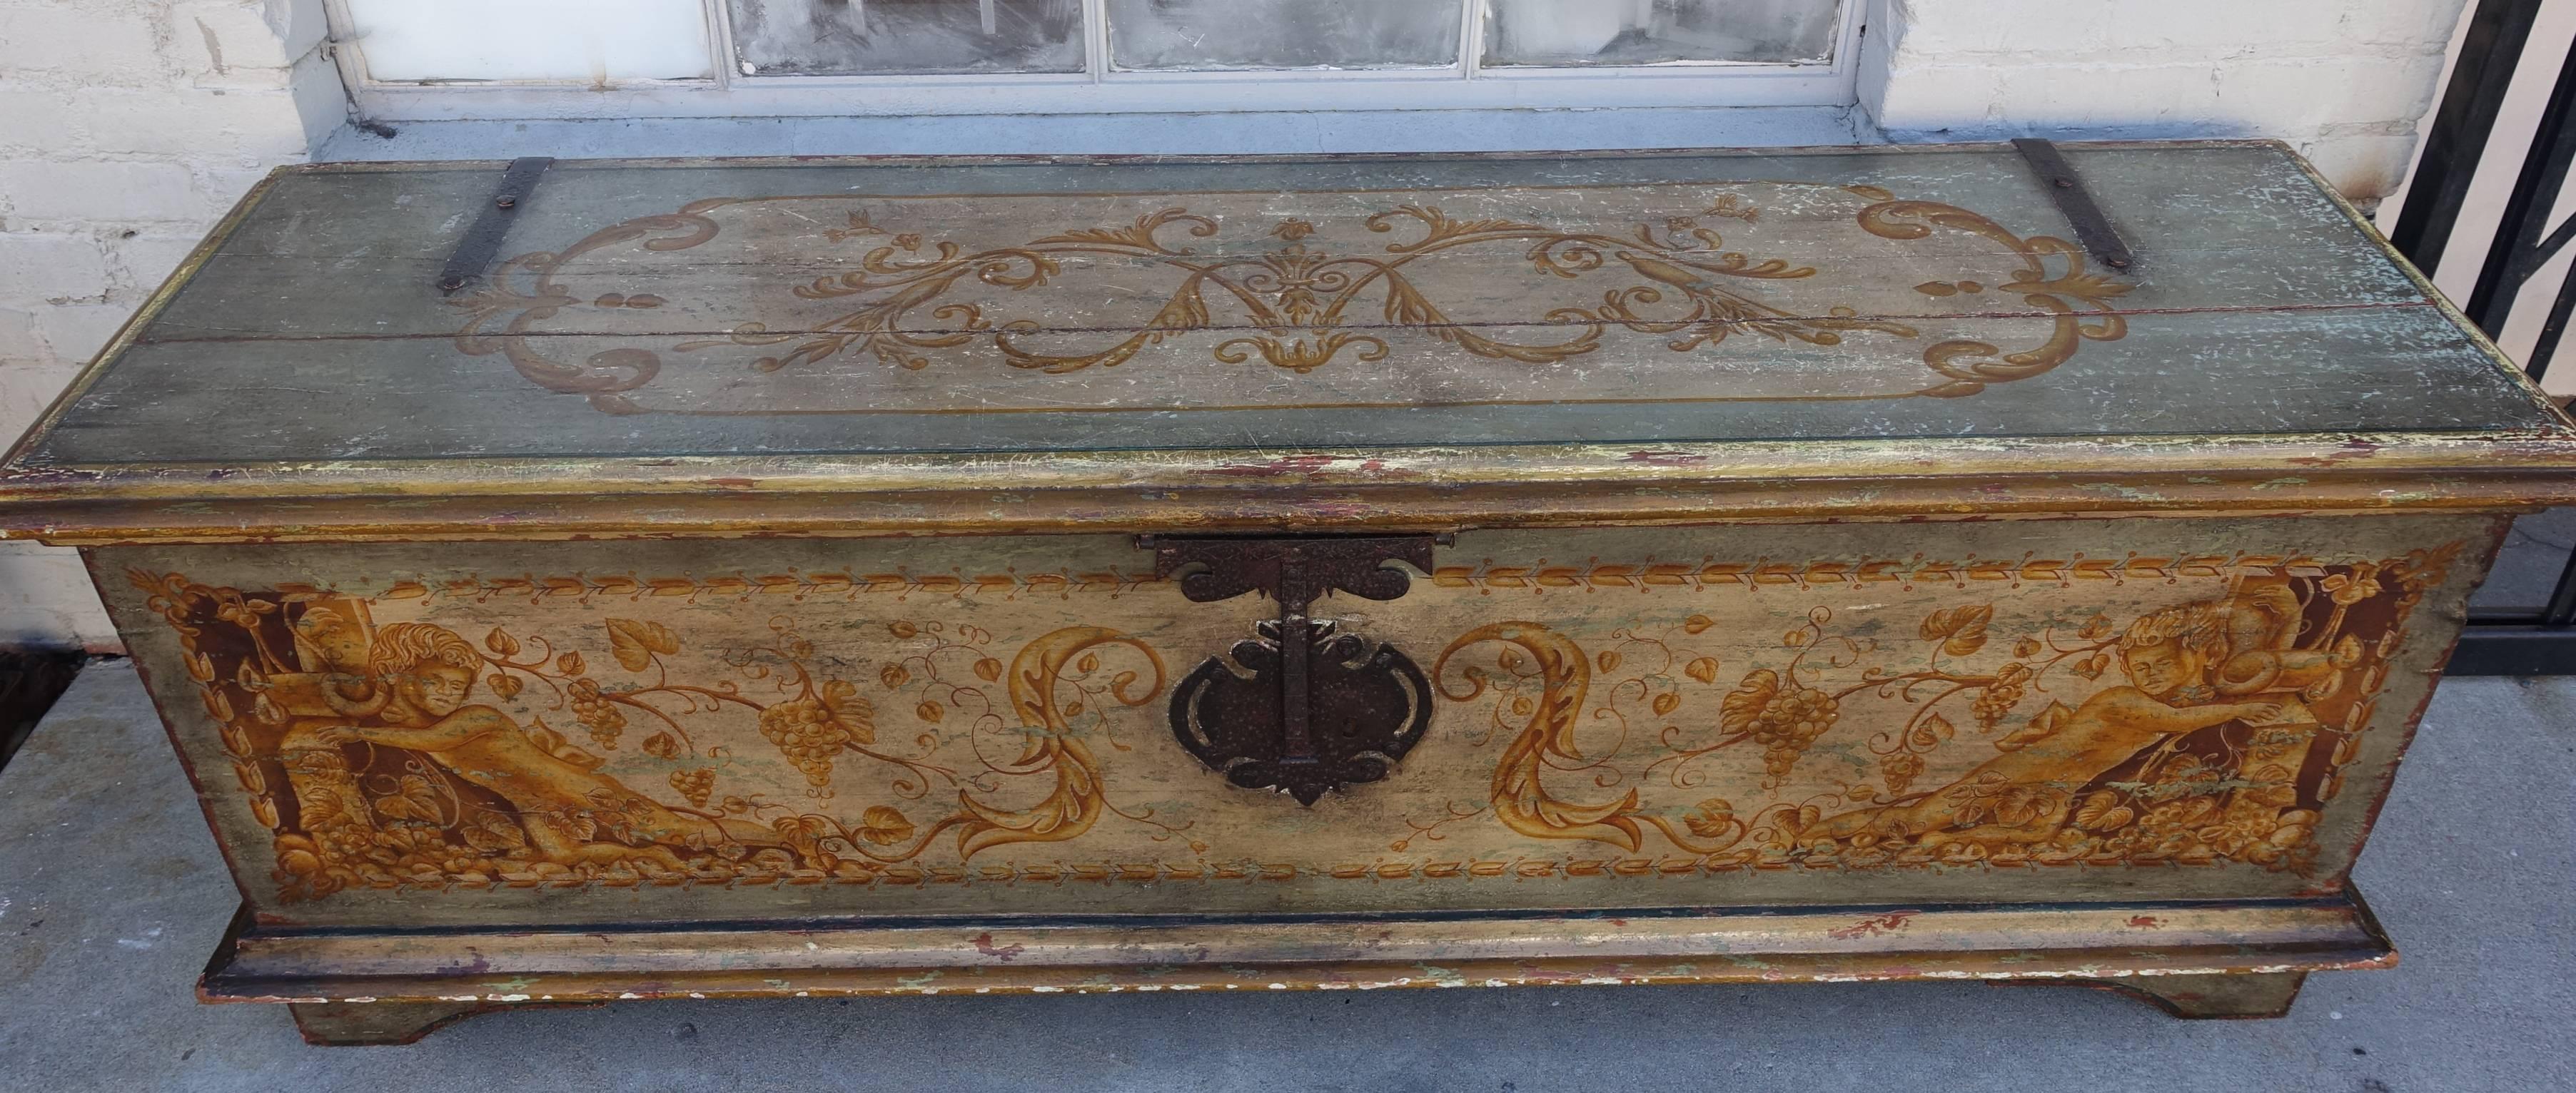 Italian hand-painted wood and iron trunk decorated with cherubs and swirling acanthus leaves throughout.